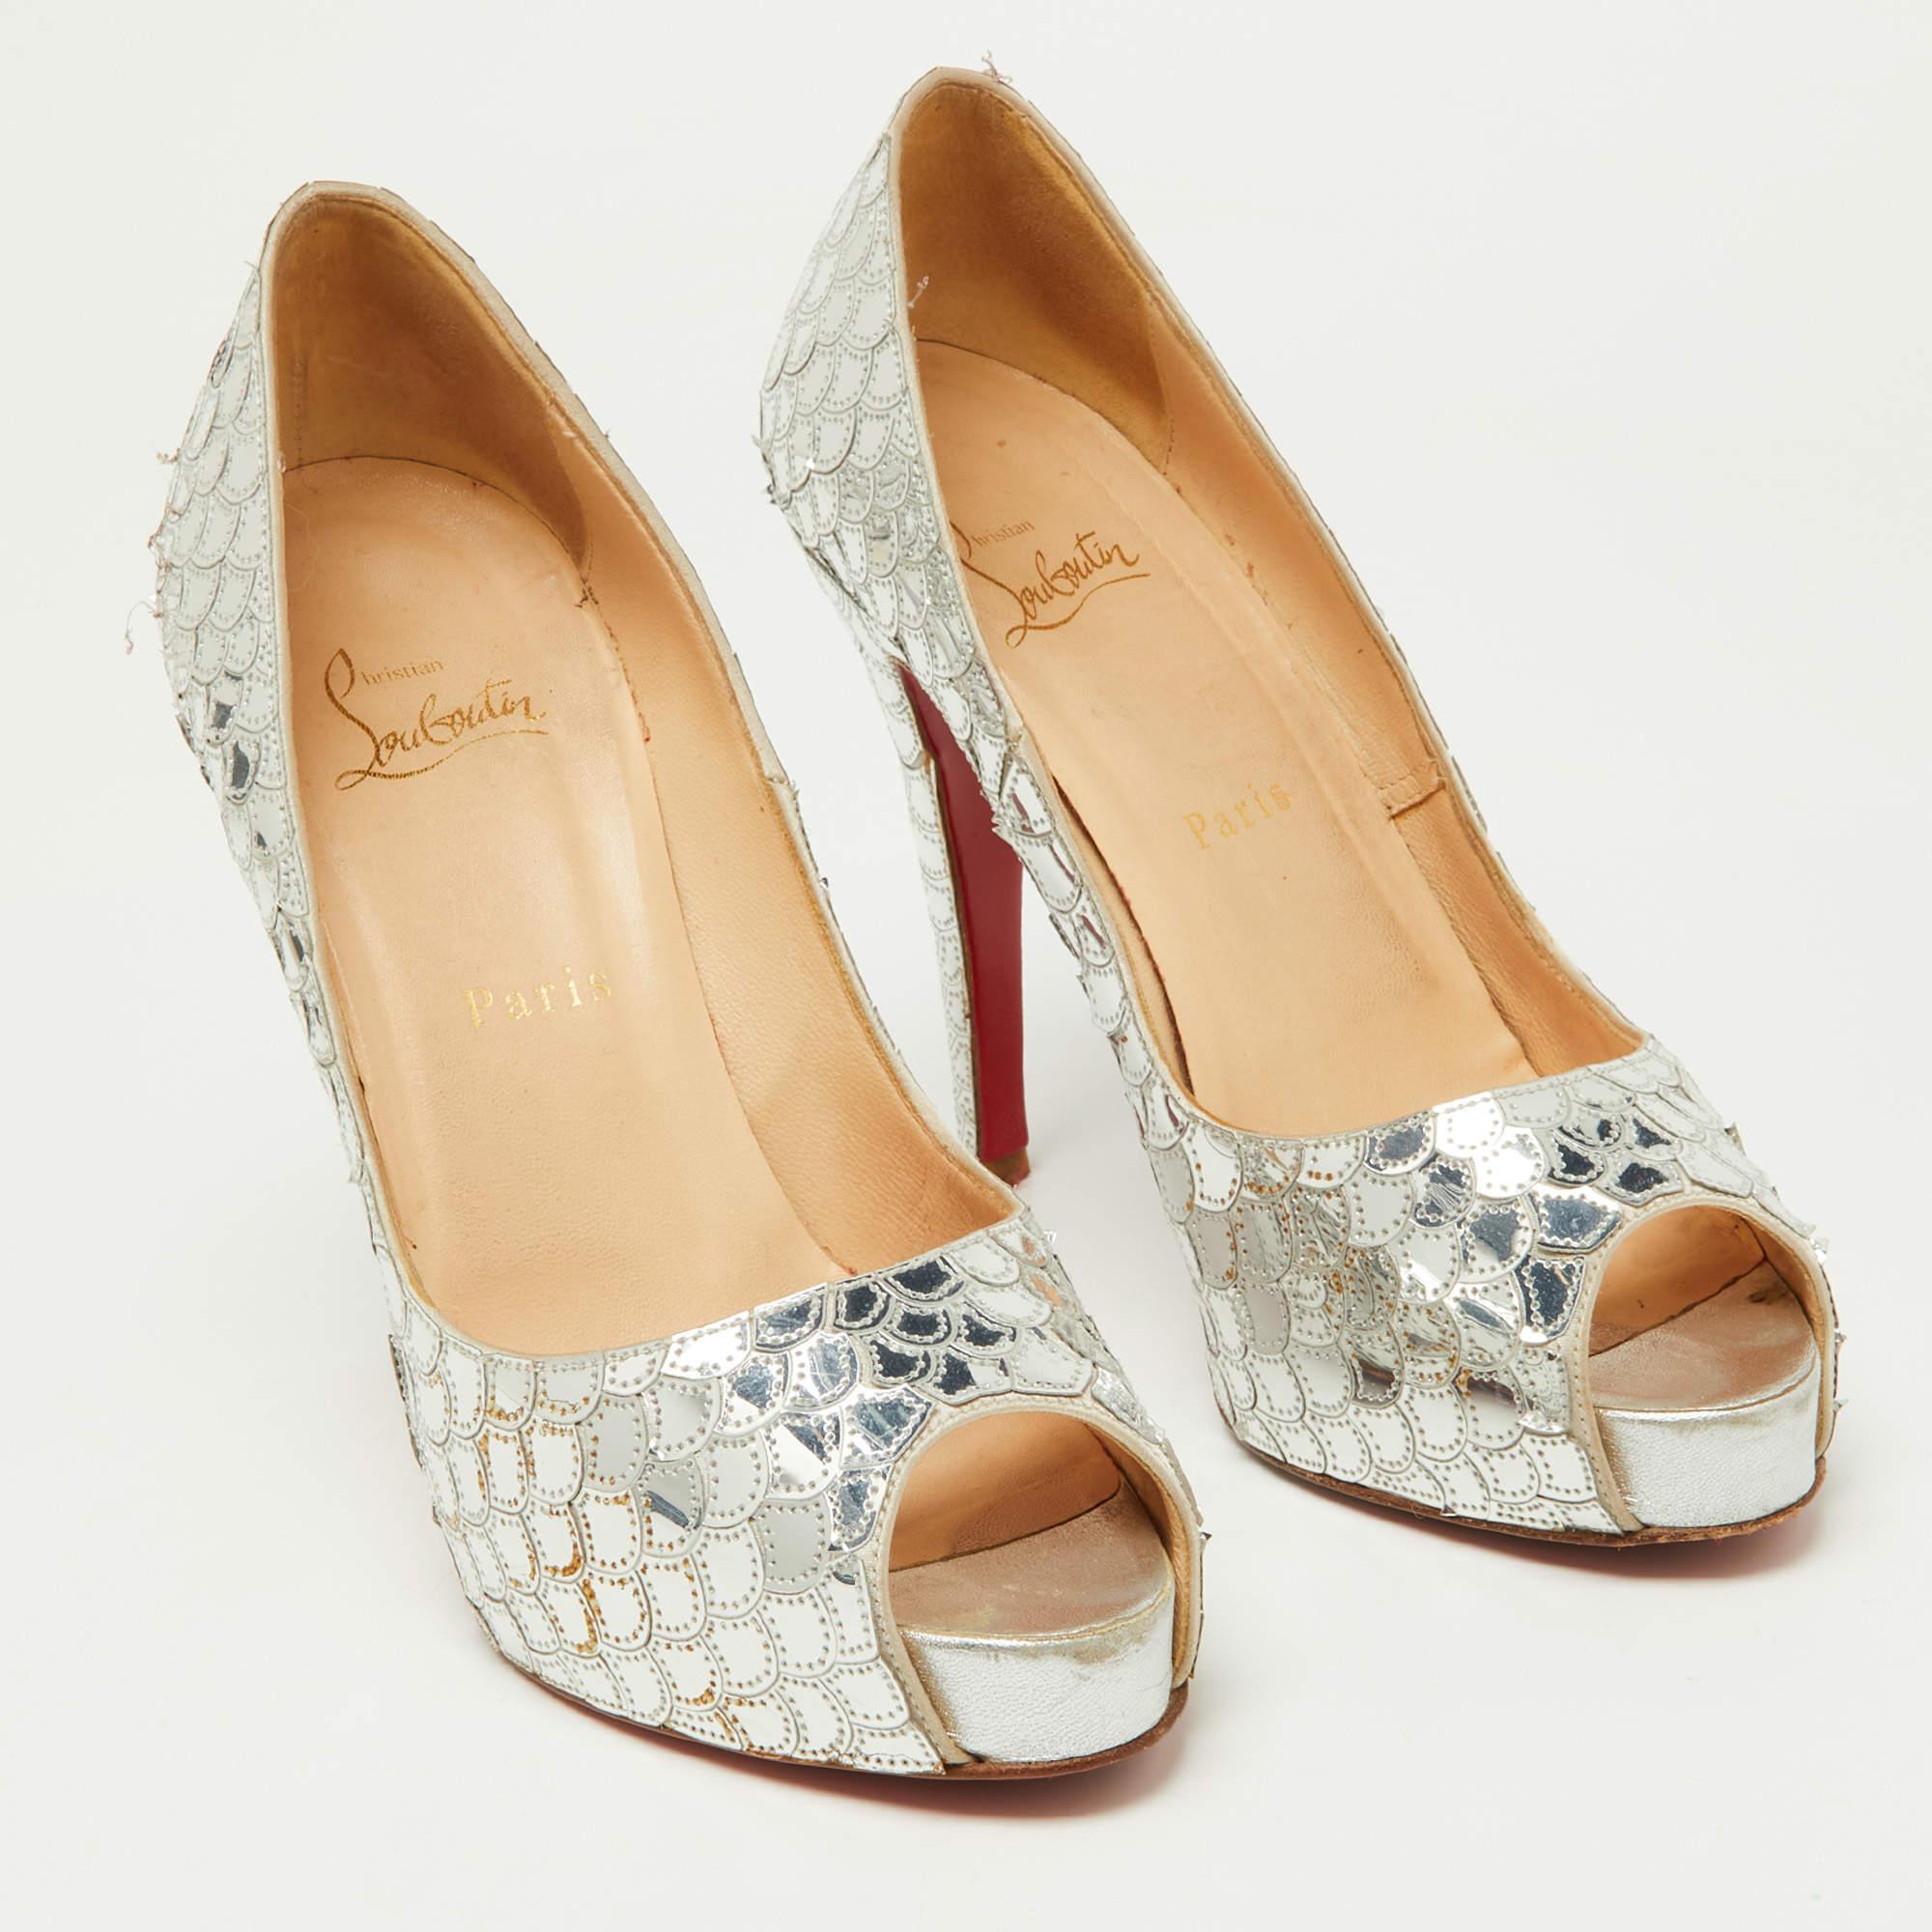 Christian Louboutin Silver Scaled Sequins and Leather Poseidon Pumps Size 38 In Fair Condition For Sale In Dubai, Al Qouz 2